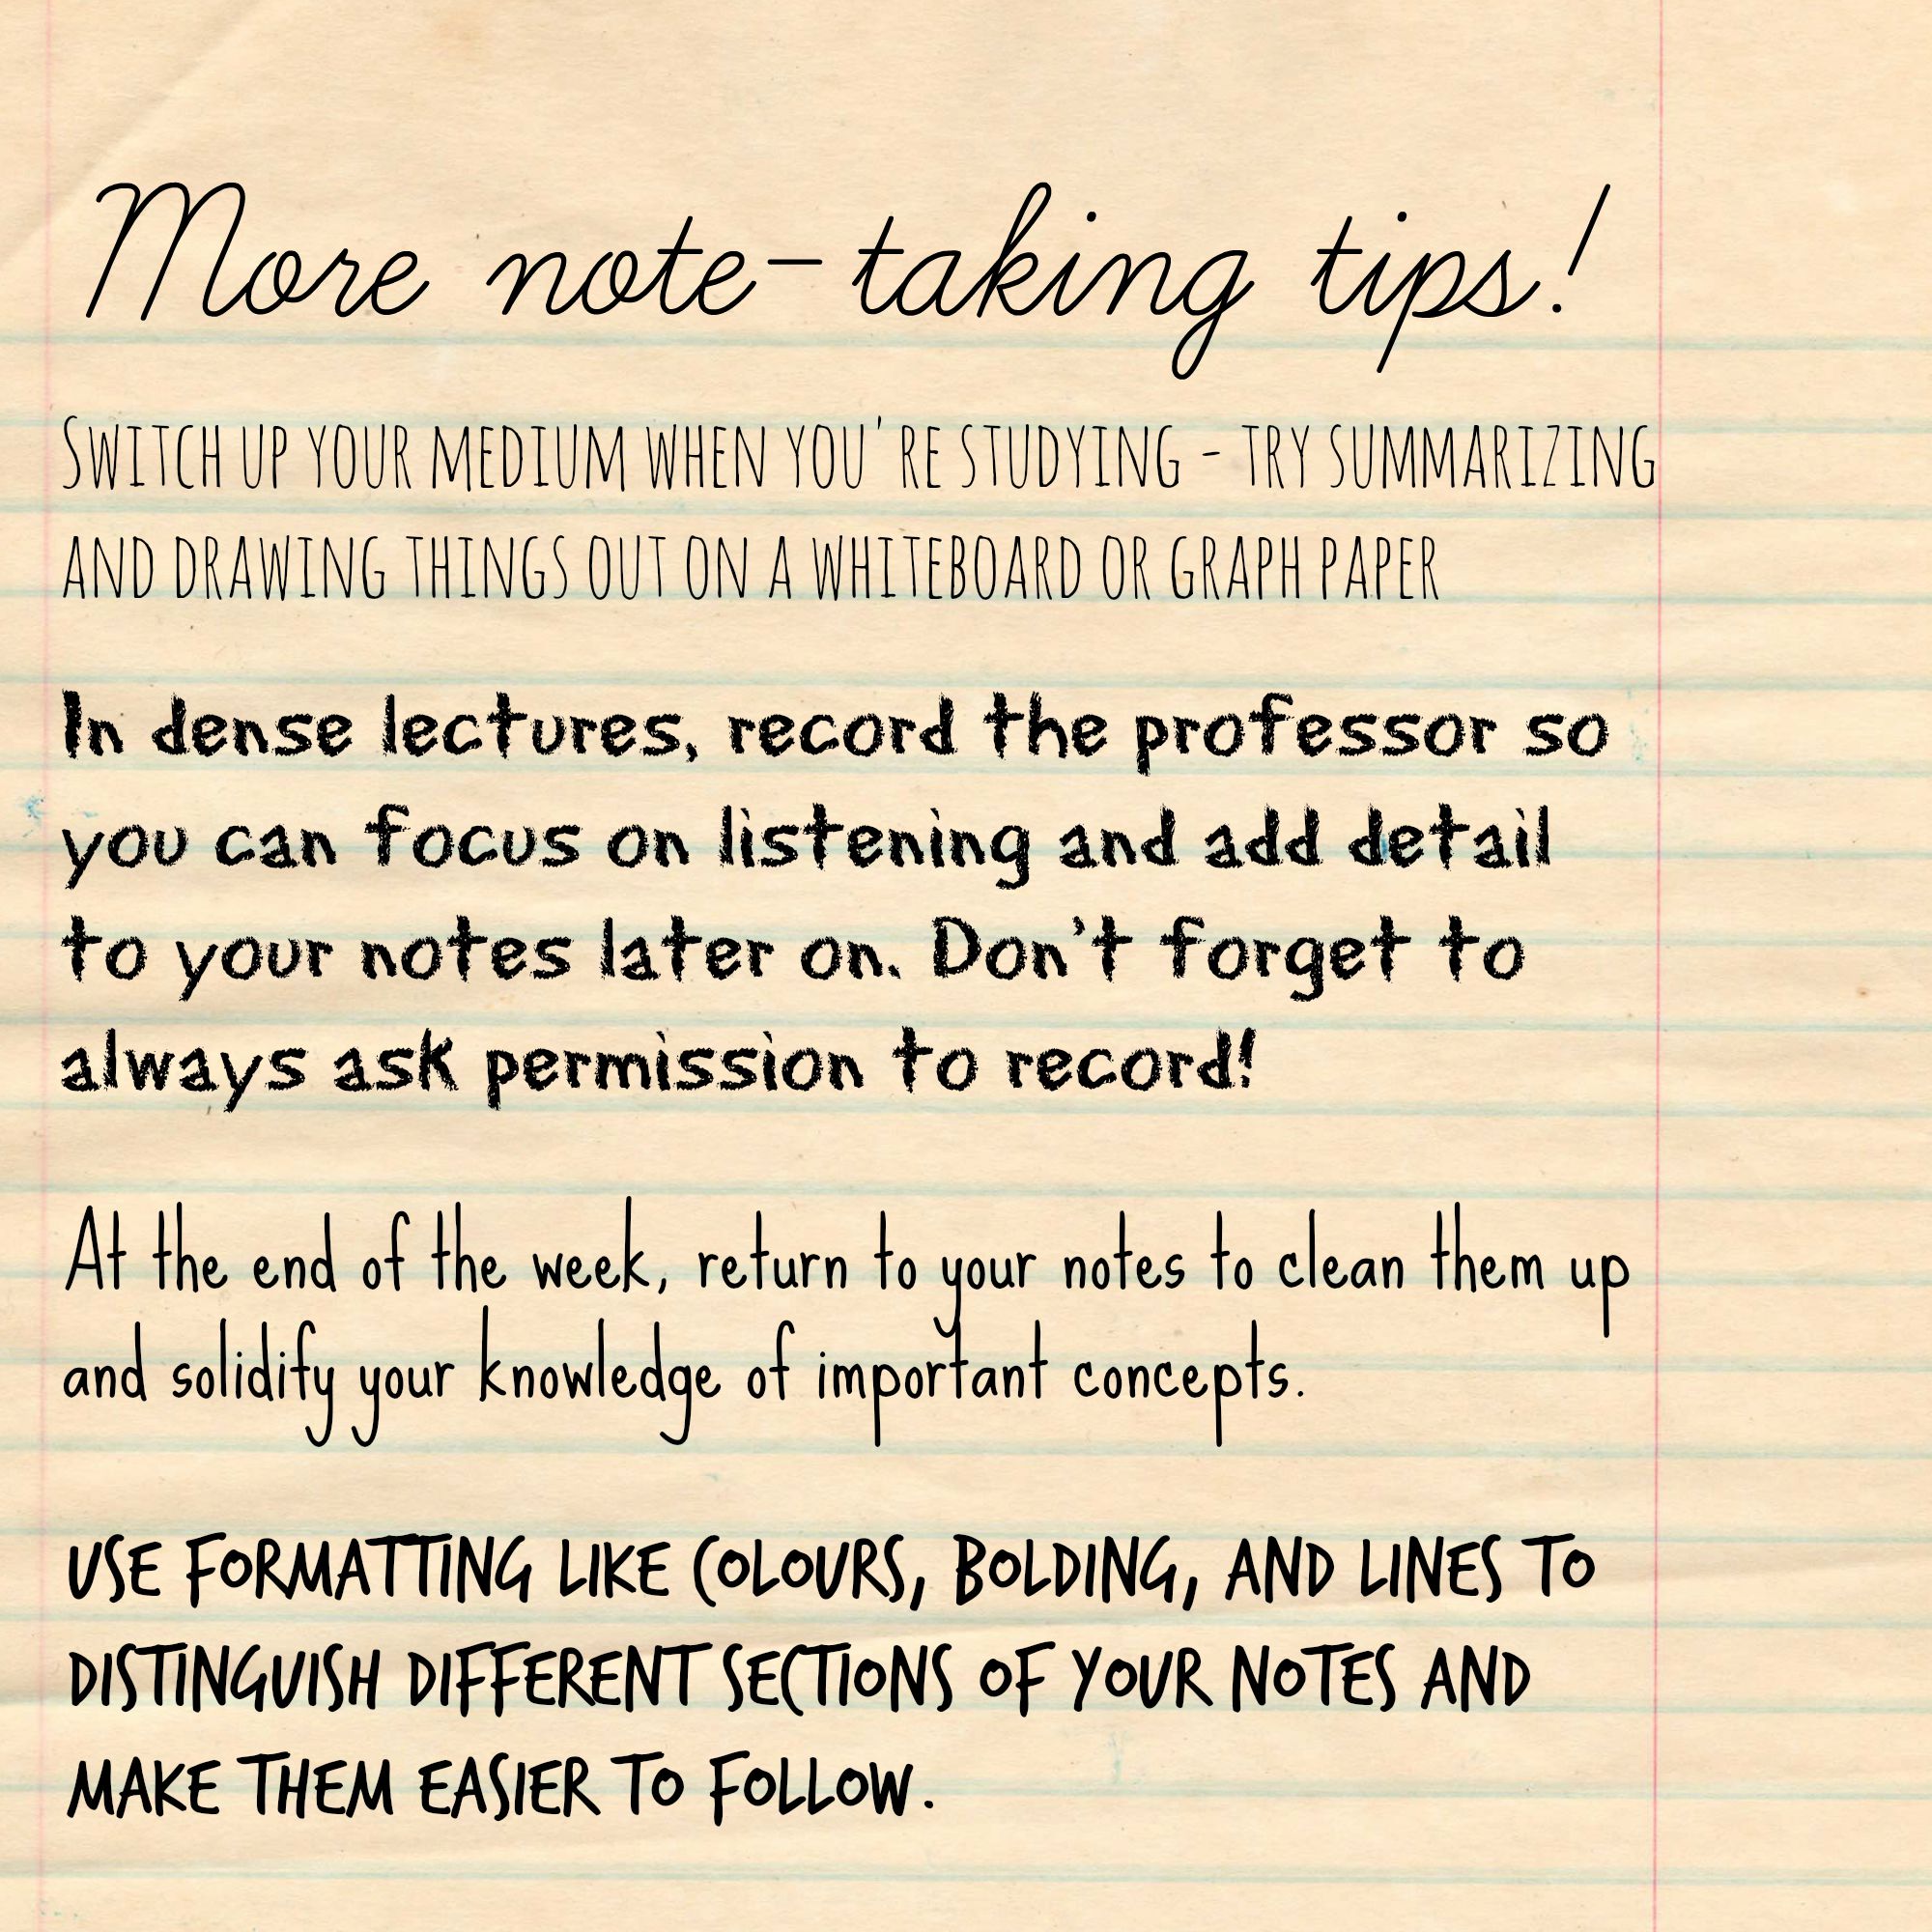 A piece of lined paper that reads: More note-taking tips! In my first year history class (Statecraft and Strategy, anyone?), I took at least four pages of lectures notes every week. I would sit at the front of the room and transcribe almost every word. And to make matters worse, my reading notes were basically a recopied version of the textbook (in which nearly every line was highlighted). When it came time to study for the exam, I had a binder bursting with dense paragraphs of commentary and tangents, with all the important details hidden underneath. Taking notes is like an art form, and everyone has their own approach to it. What works for one person may not work for you. It’s all about trial and error - trying out different strategies, getting rid of parts that don’t work for you, and keeping parts that do. Bearing that in mind, here are some of the problems I ran into when I first started taking notes in my undergrad. Taking way too many notes during lecture As mentioned earlier, I used to take enough notes per class to fill an Olympic-sized swimming pool at the end of the semester. Now, I’ve learned to listen to my professor and summarize as we move through course material. Summarizing as I go helps me remember material better because it forces me to do a memory exercise on the spot to reflect on which concepts were most important. Taking way too many notes from readings A friend of mine shared a great strategy for taking notes from readings that I now swear by. I do the reading, jotting notes in the margins as I go and highlighting things but not taking any separate notes. After I finish the reading, I write a short, point-form summary of it from memory that I can refer back to later. I find this really helps me remember what I’ve just read and focus in on important or interesting points that I can bring up in class discussion. Laptop or notebook? This is a common conundrum when it comes to note-taking. In first-year, I used my laptop to take notes because I was trying to get down every word the professor was saying. Now, I always have my laptop with me in case I want to get something down from lecture in greater detail, but I use my notebook because the act of writing seems to help me remember concepts better. I can tune out while I’m using my laptop, but to catch things while I’m writing, I have to pay close attention and summarize concepts on the spot to take good notes. There is also some scientific evidence that writing by hand leads to greater memory retention - as mentioned in this Guardian article that one of my professors shared ahead of our first lecture to offer a counterpoint to electronic notetaking. But a lot of people prefer using their laptops, and there’s nothing wrong with that! Plus, it makes you a great candidate to help out other students as a volunteer note-taker with Accessibility Services - check out more information on volunteer note-taking at this link. (Though not to worry, you can still be a volunteer note-taker with handwritten notes!) Everyone has a different style of note-taking that works for them - from using your own elaborate shorthand on a word processor, to using an app like Evernote, to scribbling summaries in your notebook like me. Don’t fret about getting every word down or taking “perfect” notes - the trick is to find the strategy that helps you learn best and go with that. Questions about note-taking? Hit me up in the comments! For tips on note-taking and reading, check out the Academic Success Centre’s workshop this Thursday, October 1 at 6:30 pm in the Blackburn Room at Robarts Library. The ASC has tons of other academic workshops on topics like exam prep, writing, and giving presentations. Check out the full schedule on their website. In dense lectures, record the professor so you can focus on listening and add detail to your notes later on. Don't forget to always always ask permission to record! At the end of the week, return to your notes to clean them up and solidify your knowledge of important concepts. Use formatting like colours, bolding, and lines to distinguish different sections of your notes and make them easier to follow.